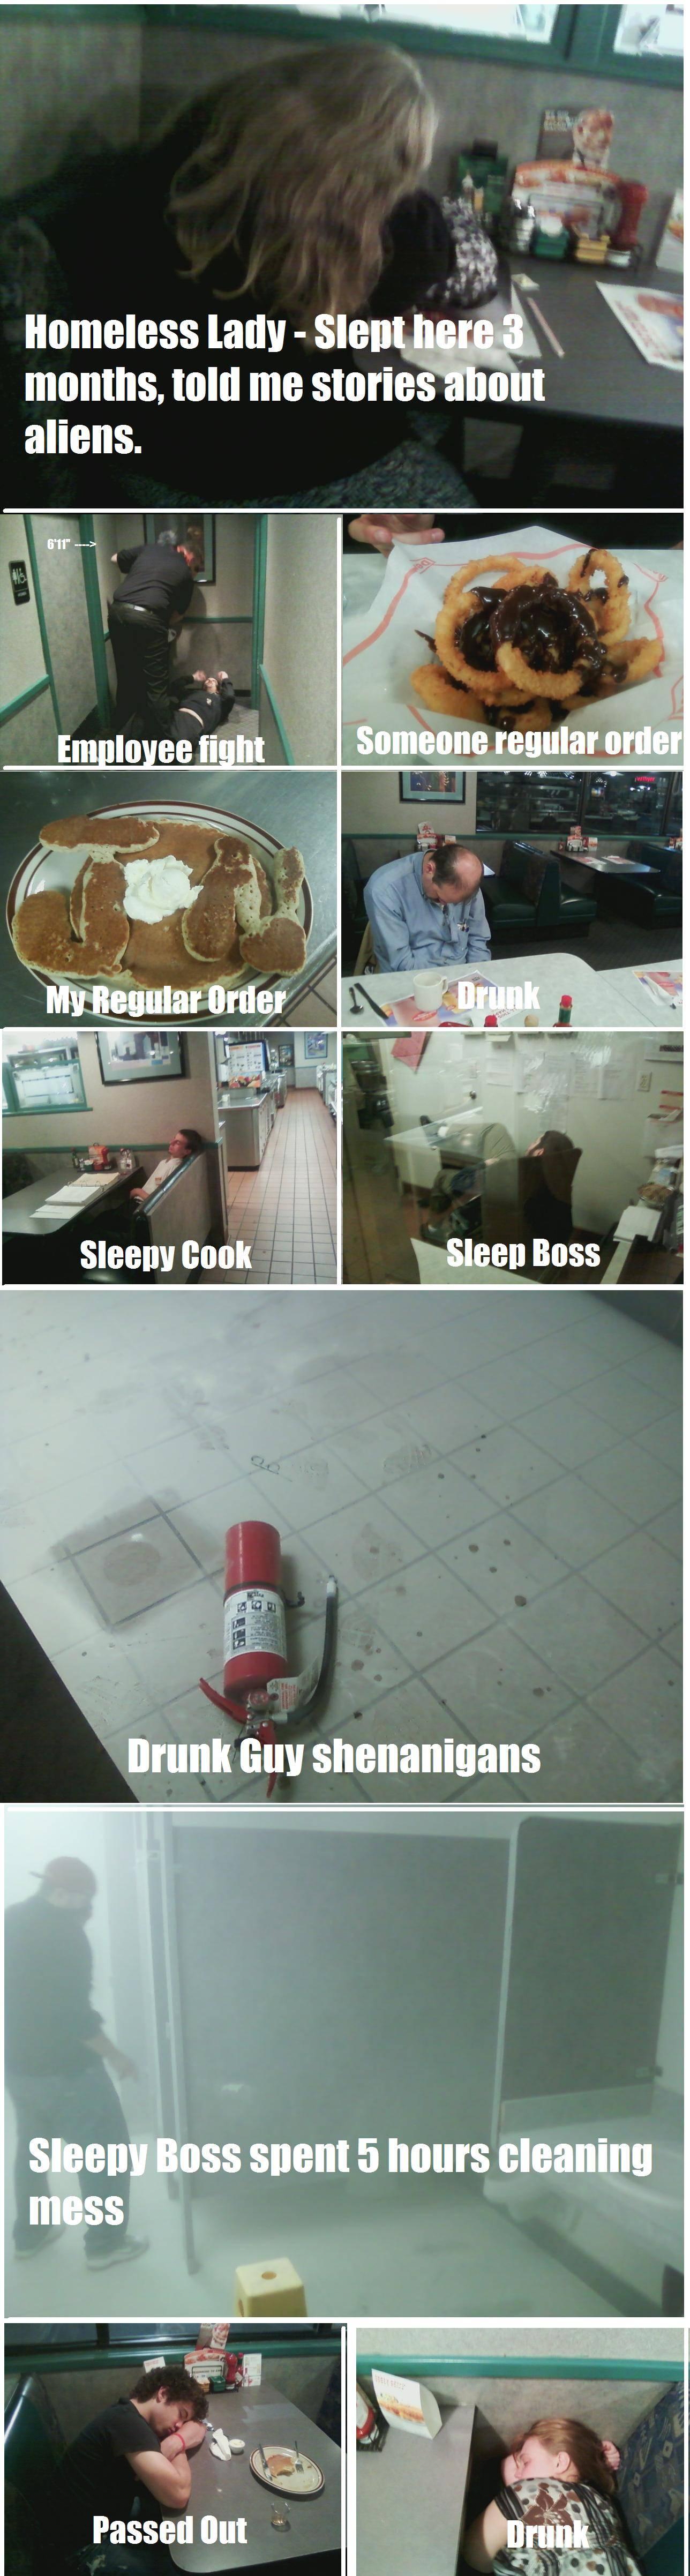 My experience working the graveyard shift at denny's -   Misc